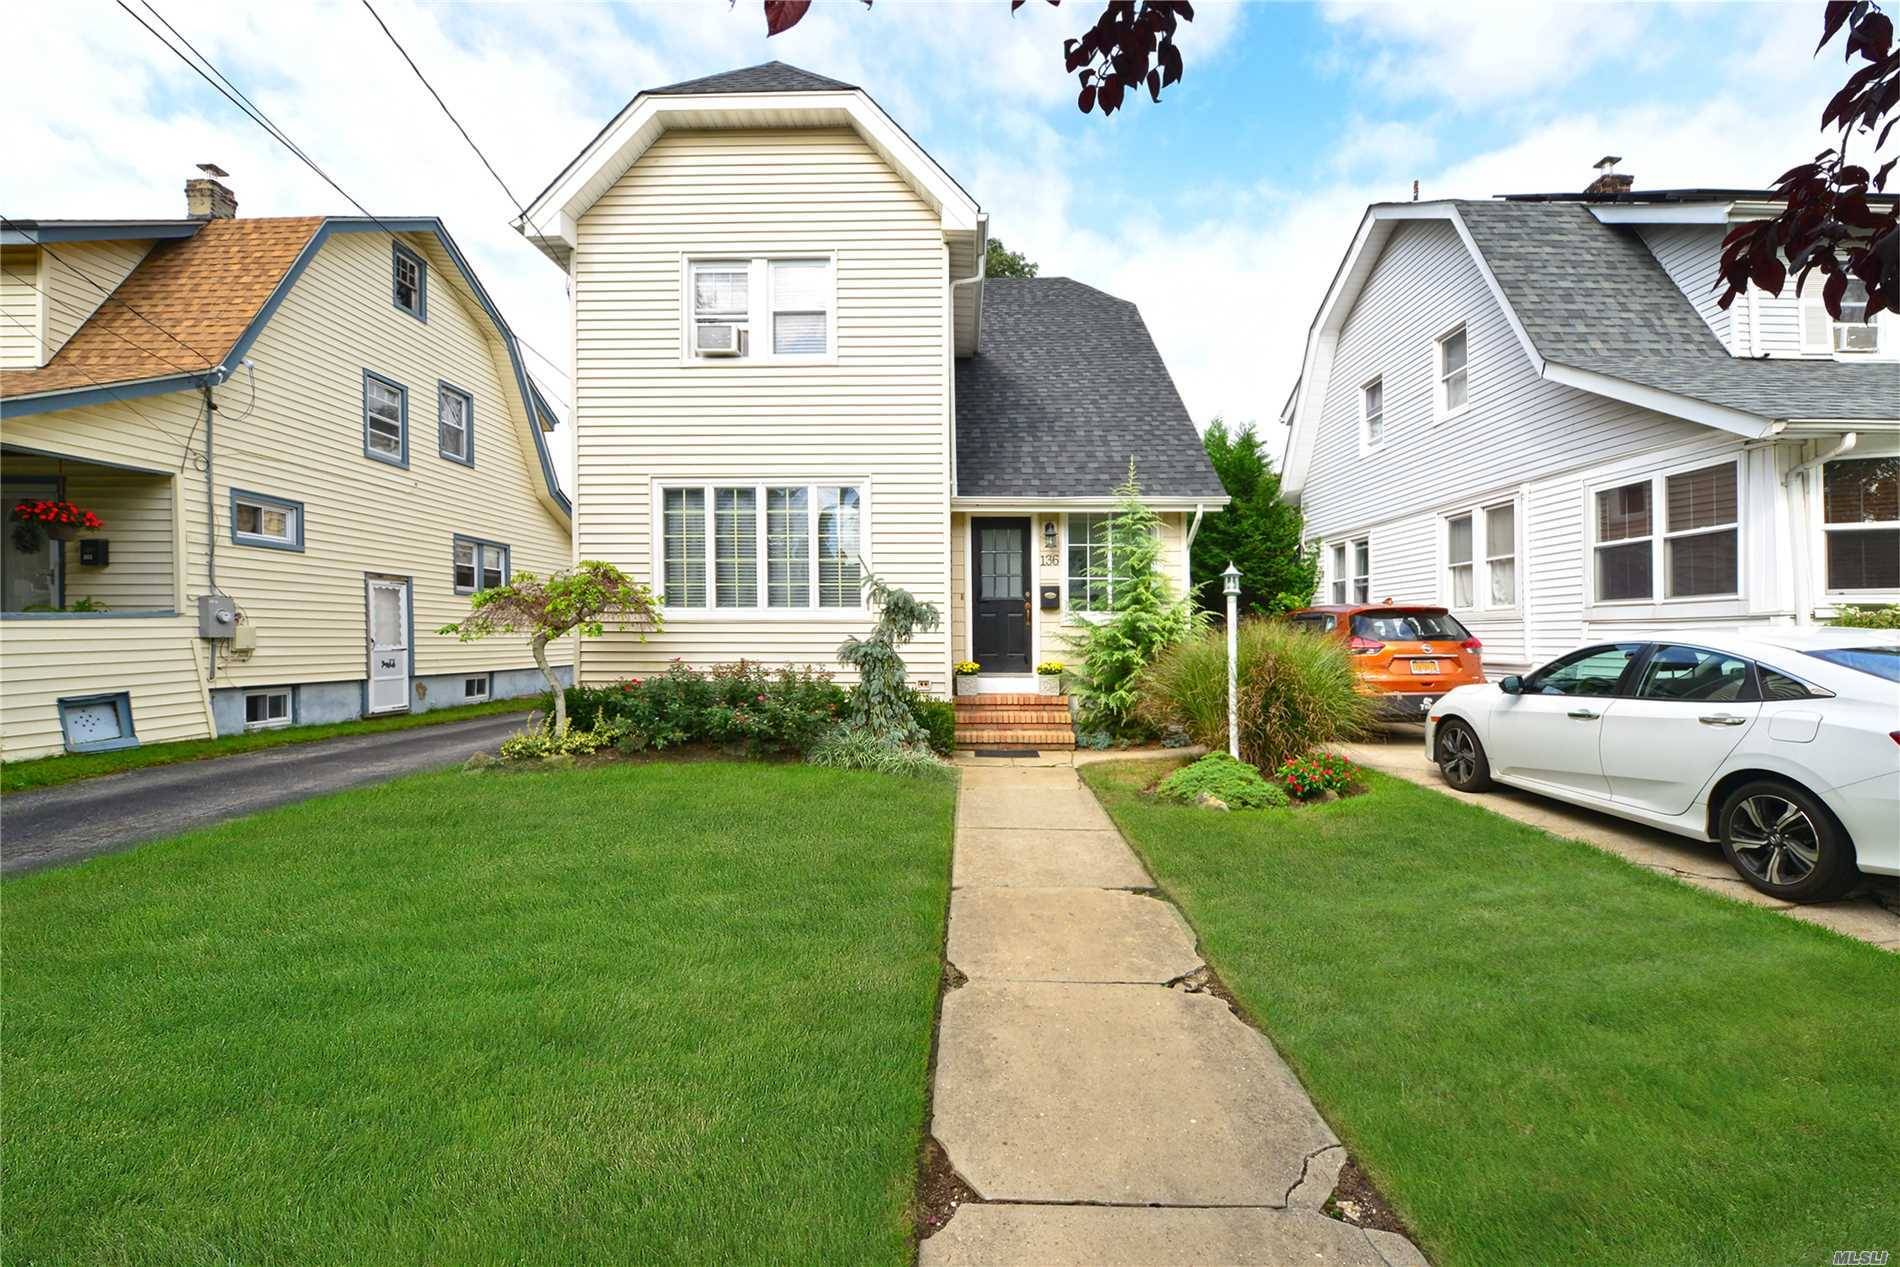 Immaculate 3 Bedroom Colonial With Many Updates.